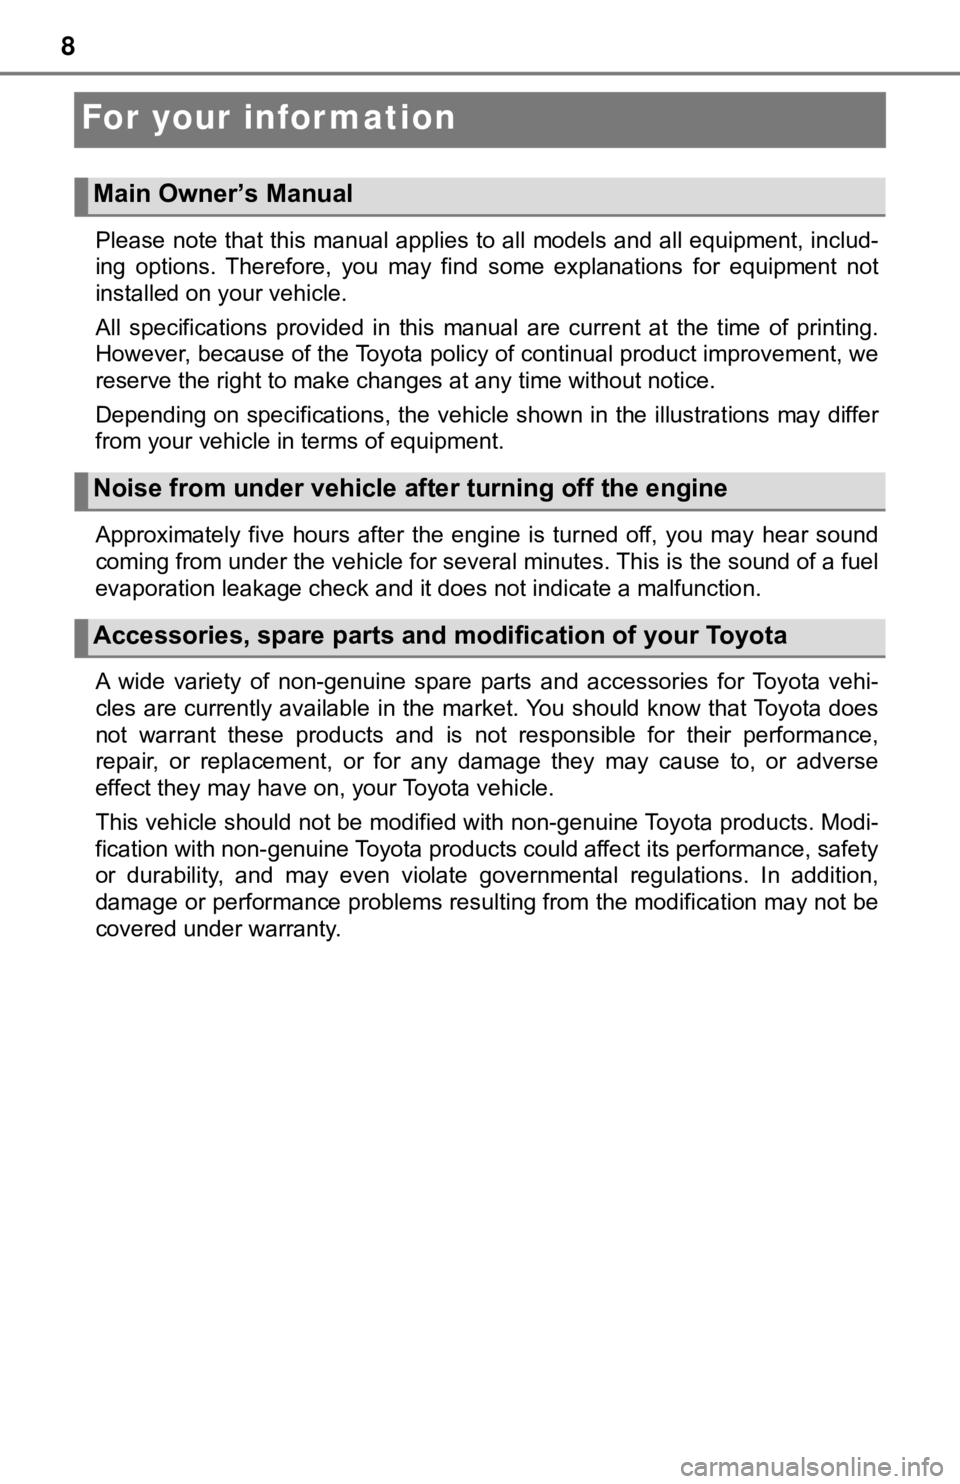 TOYOTA TUNDRA 2018  Owners Manual (in English) 8
For your infor mation
Please note that this manual applies to all models and all equipment, includ-
ing  options.  Therefore,  you  may  find  some  explanations  for  equi pment  not
installed on y